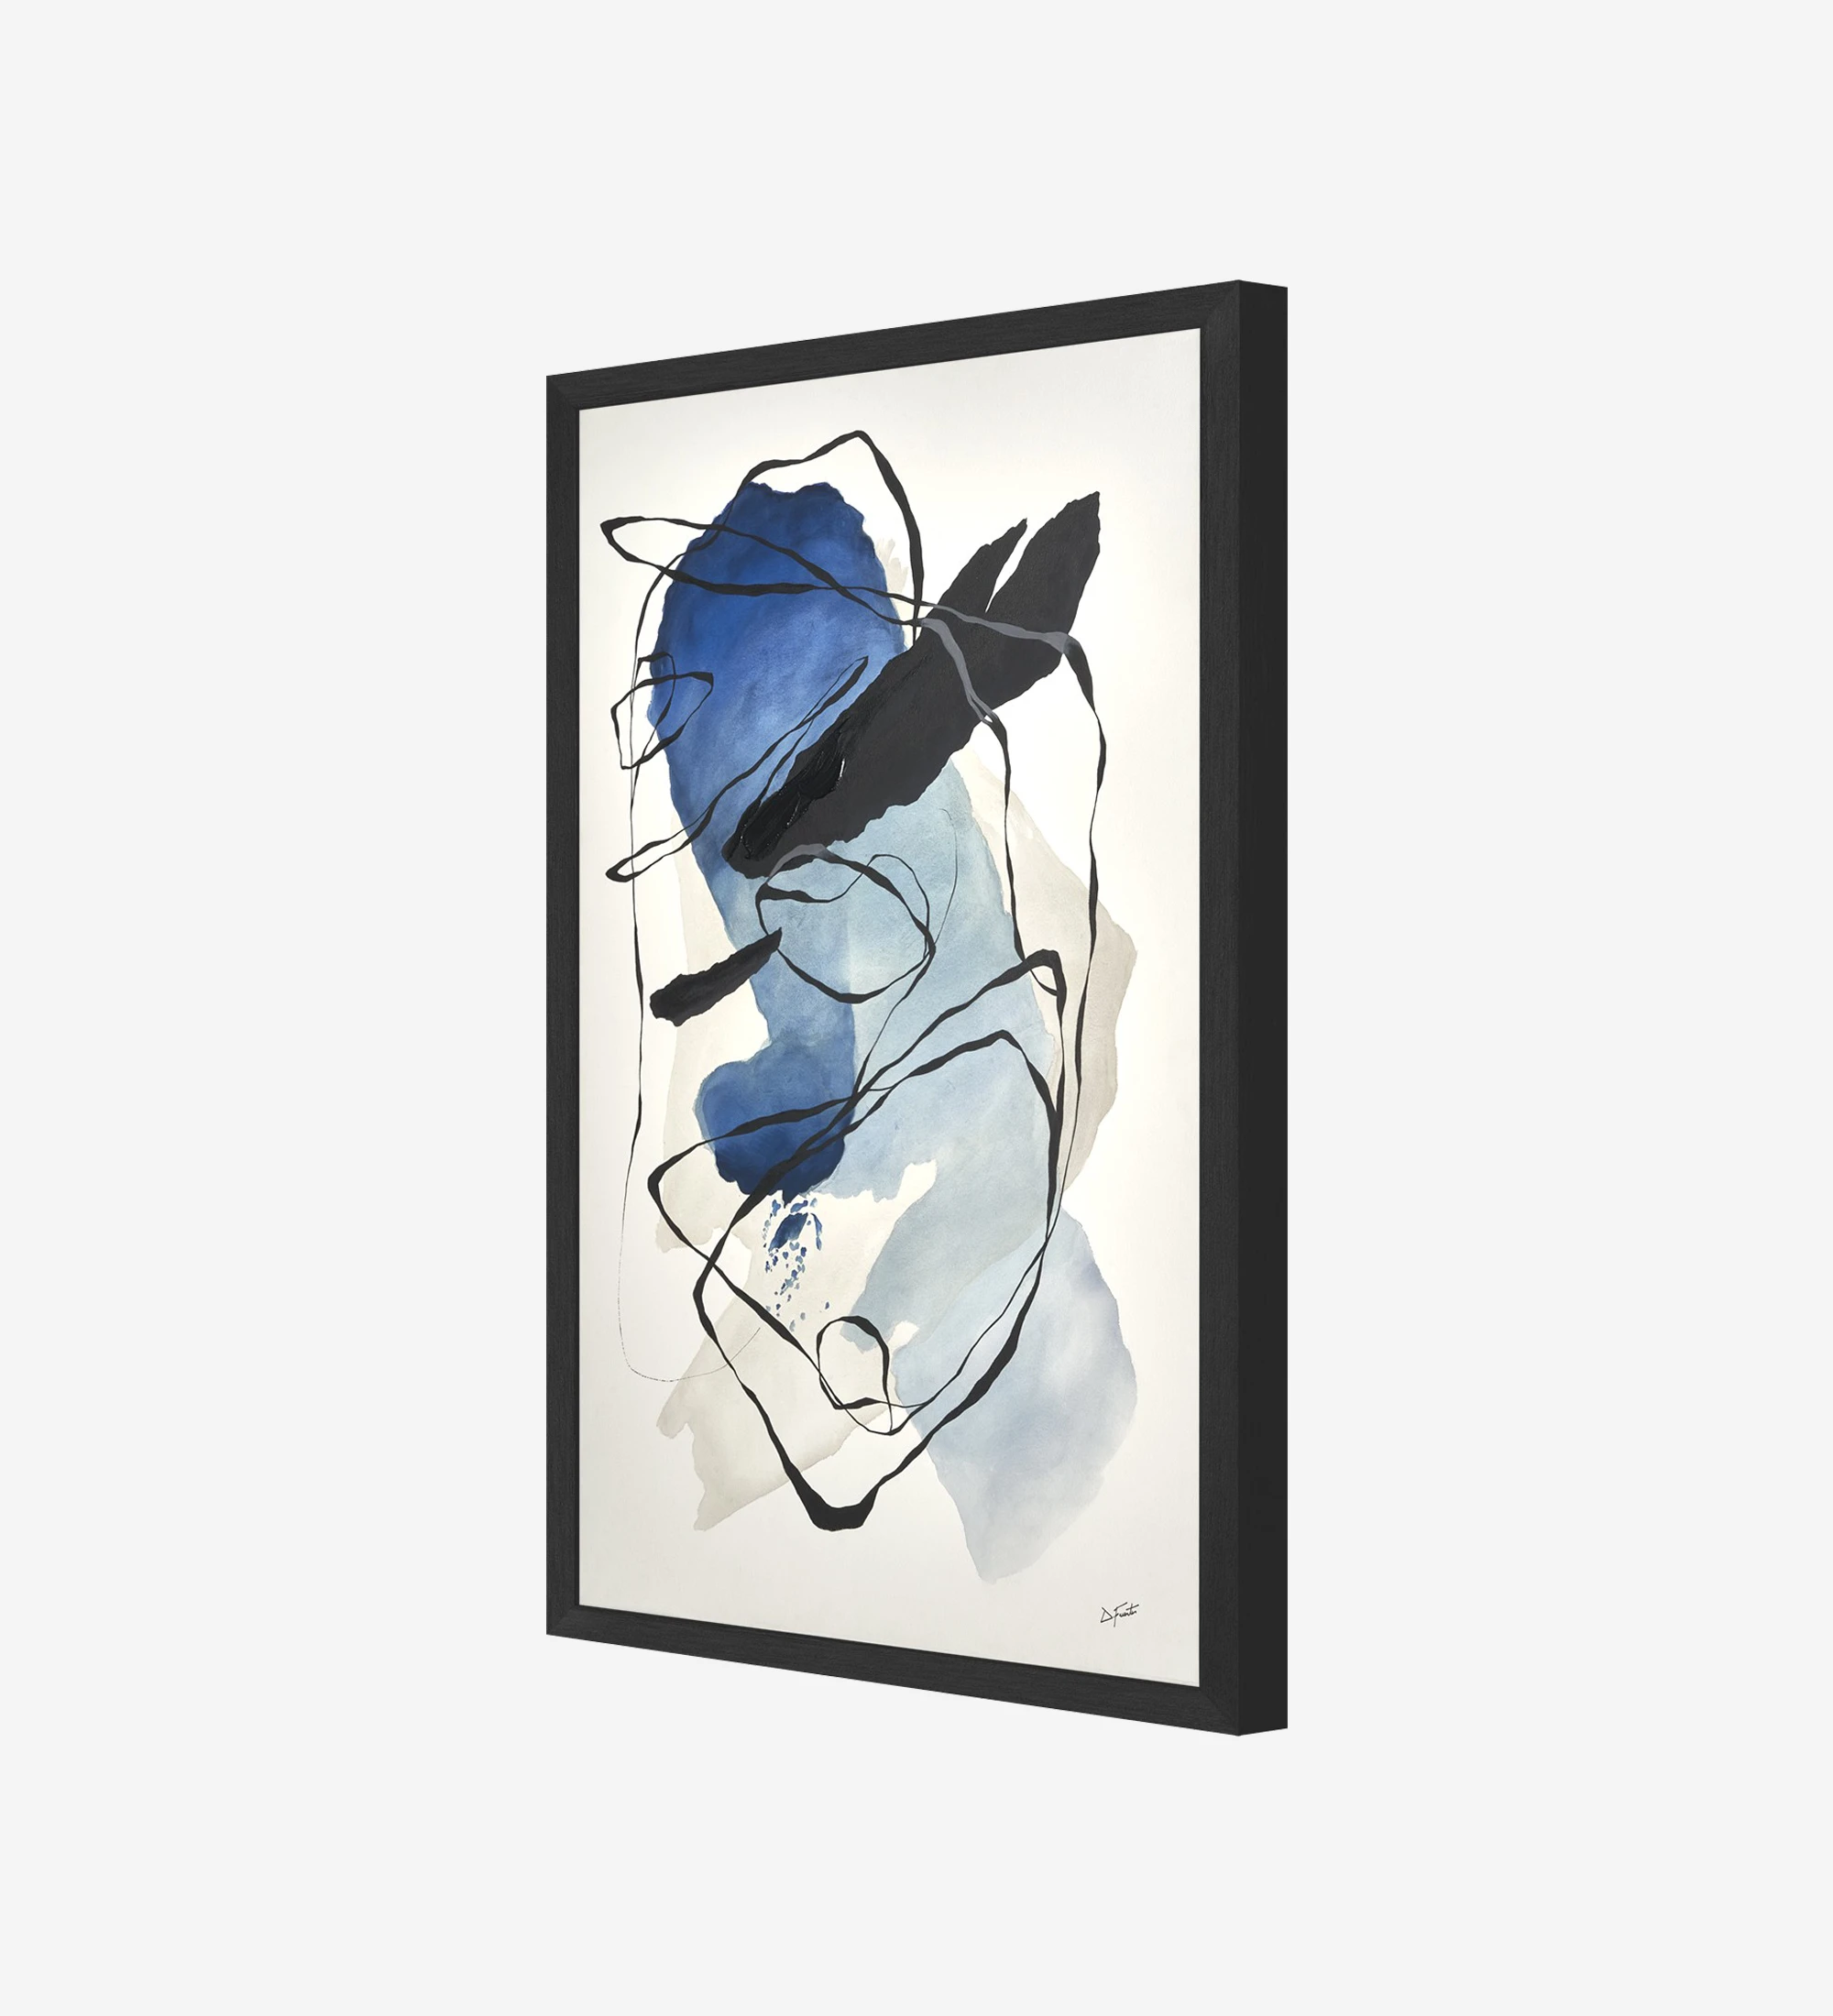 Blue abstract painting, wooden frame, 90 x 120 cm.